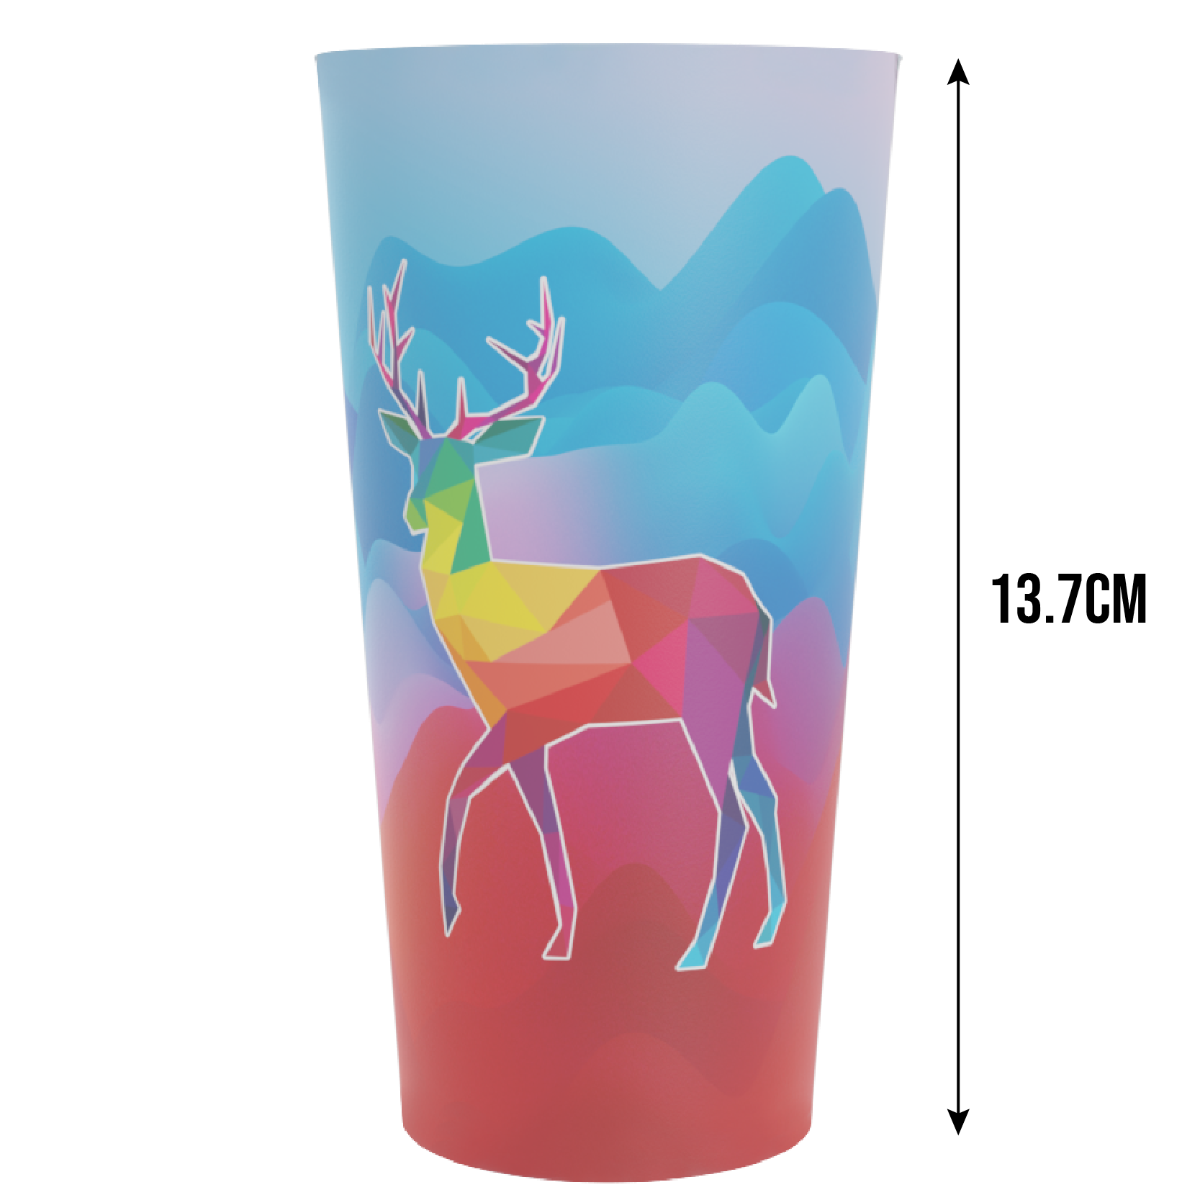 Full colour large translucent cup